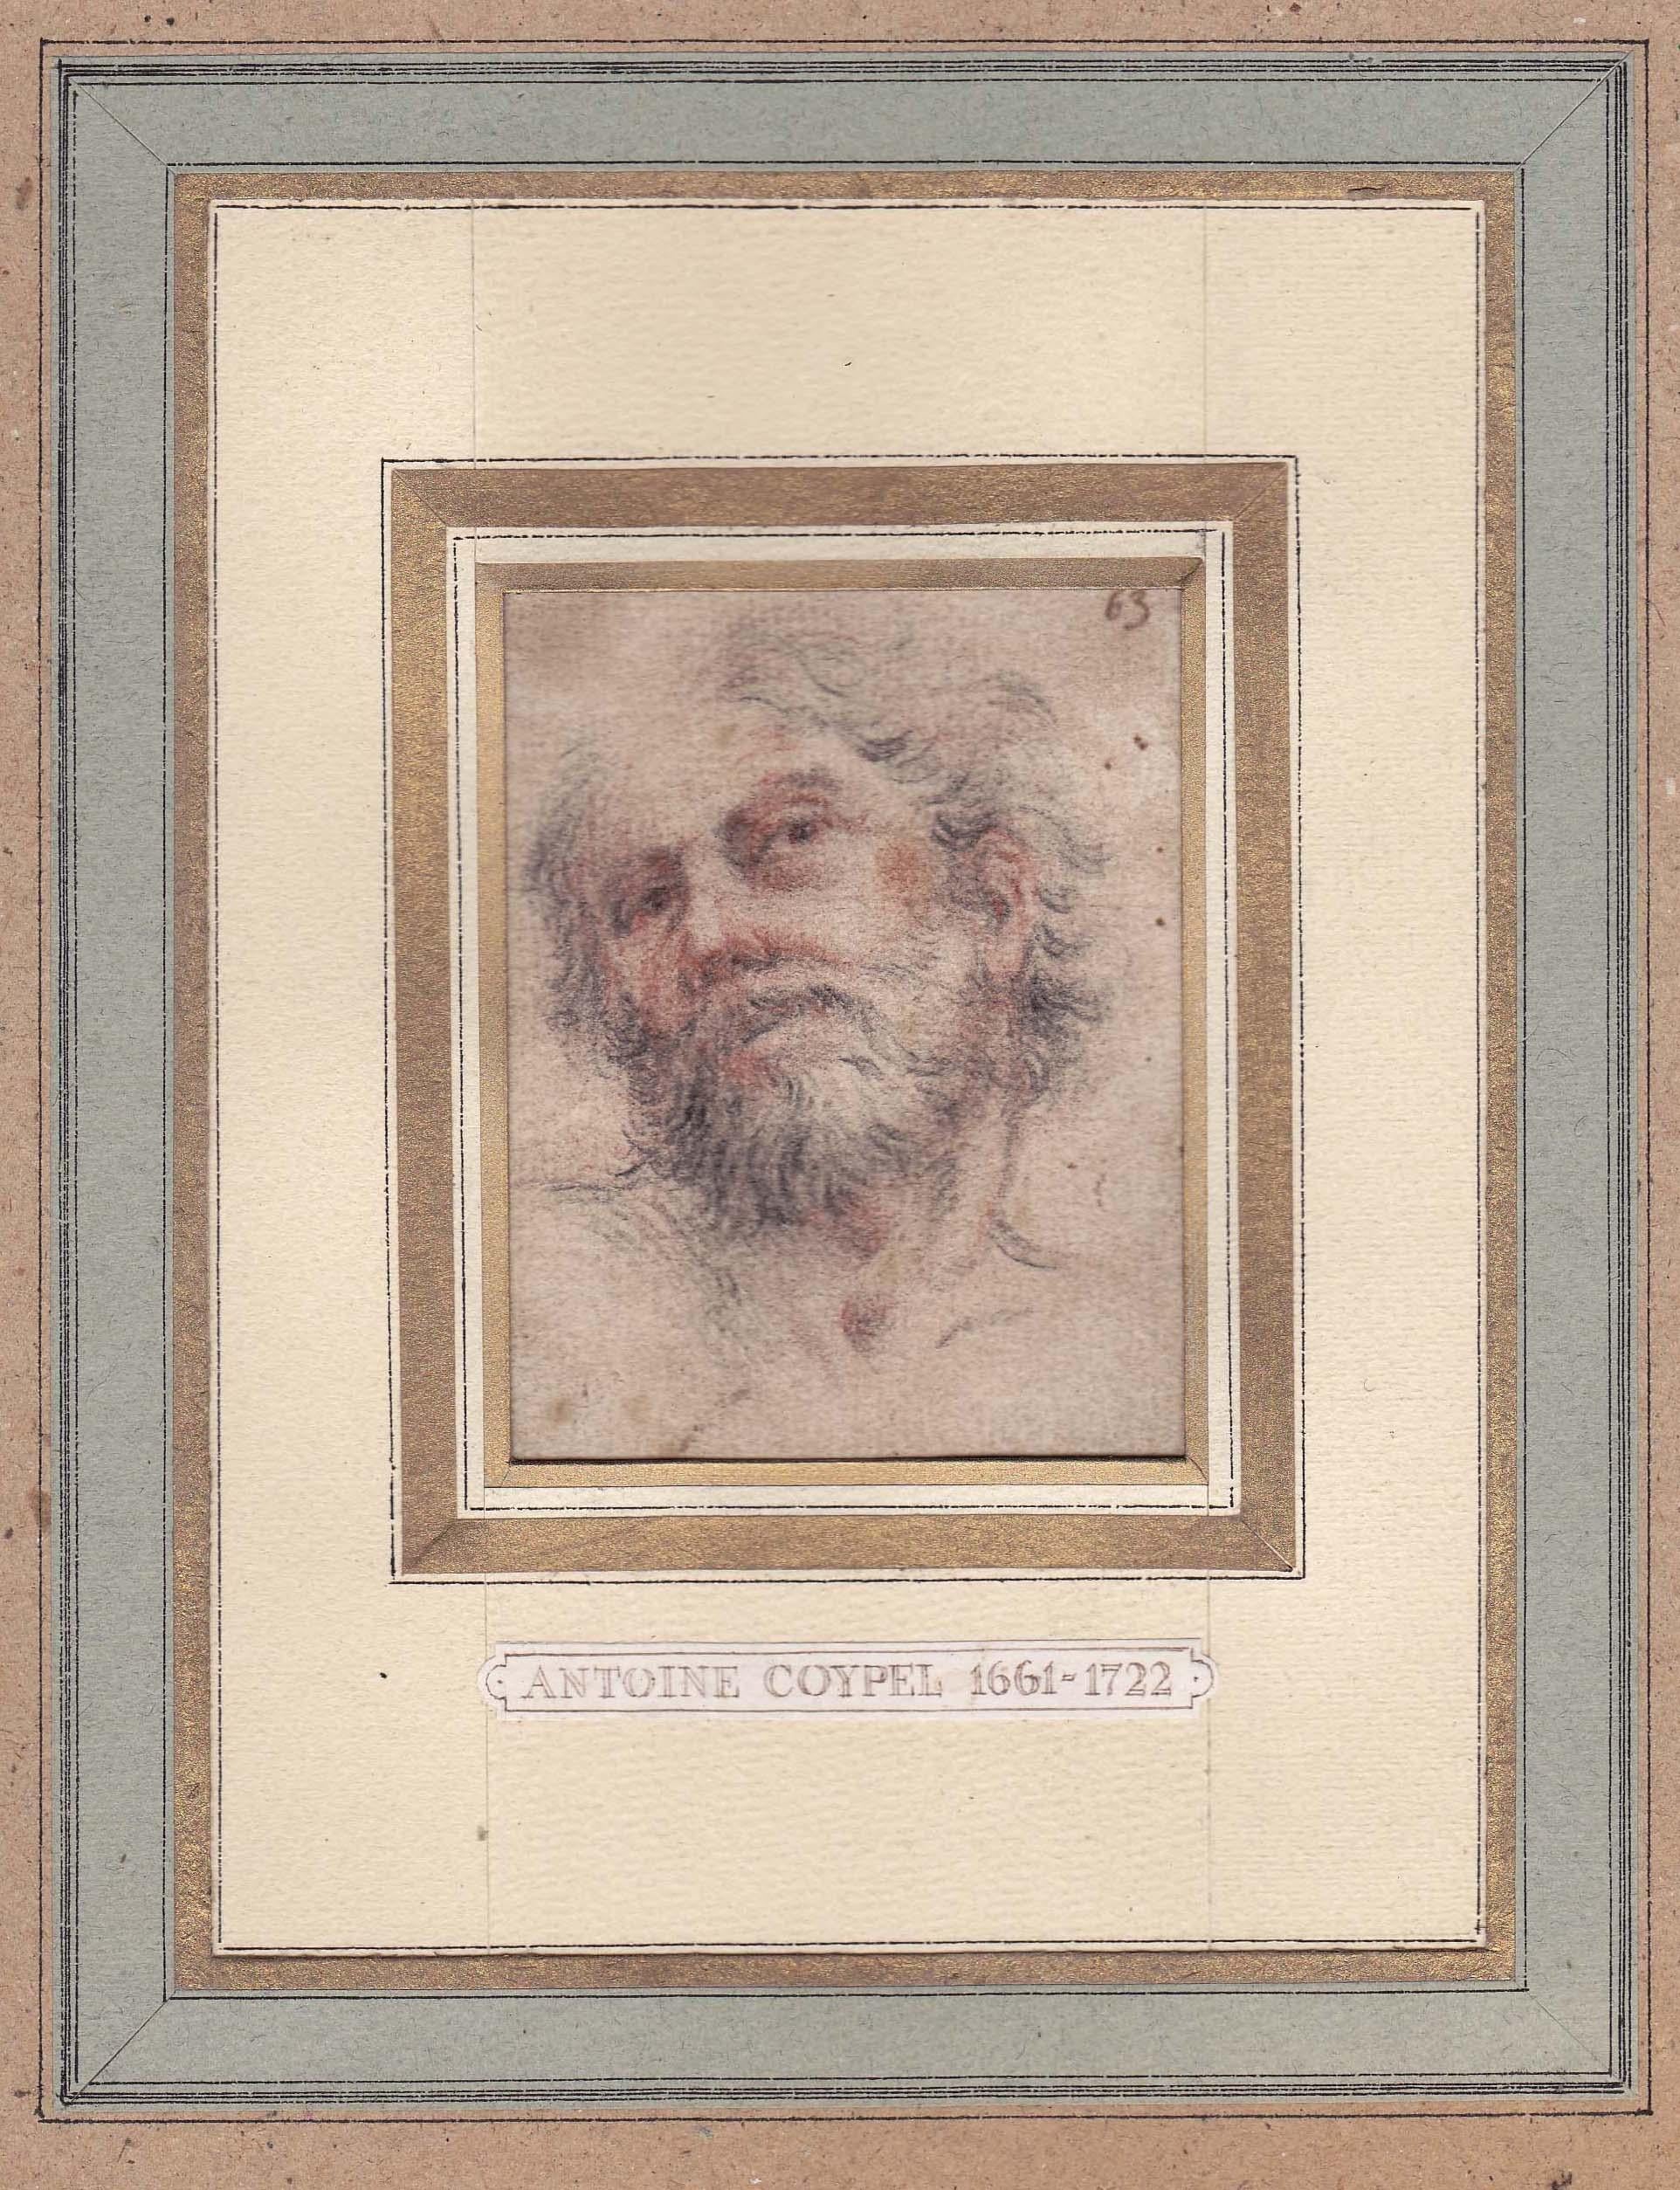 Old master drawing
Manner of Antoine Coypel (Paris 1661-1722)

Head of a bearded man

Black chalk heightened with red on laid paper.

Approximate measures: 3 1/2in. (9 cm.) x 2 3/4in. (7 cm.)

French matting with label
in a distressed gilt